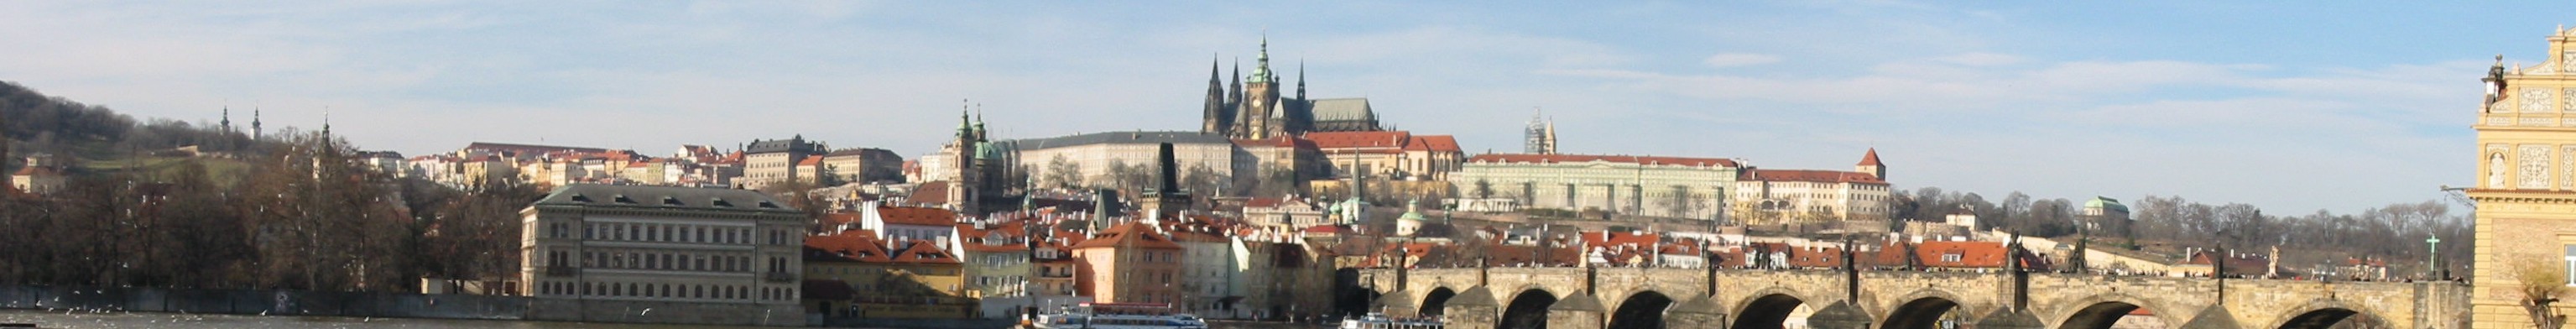 A view of Hradcany, 2002